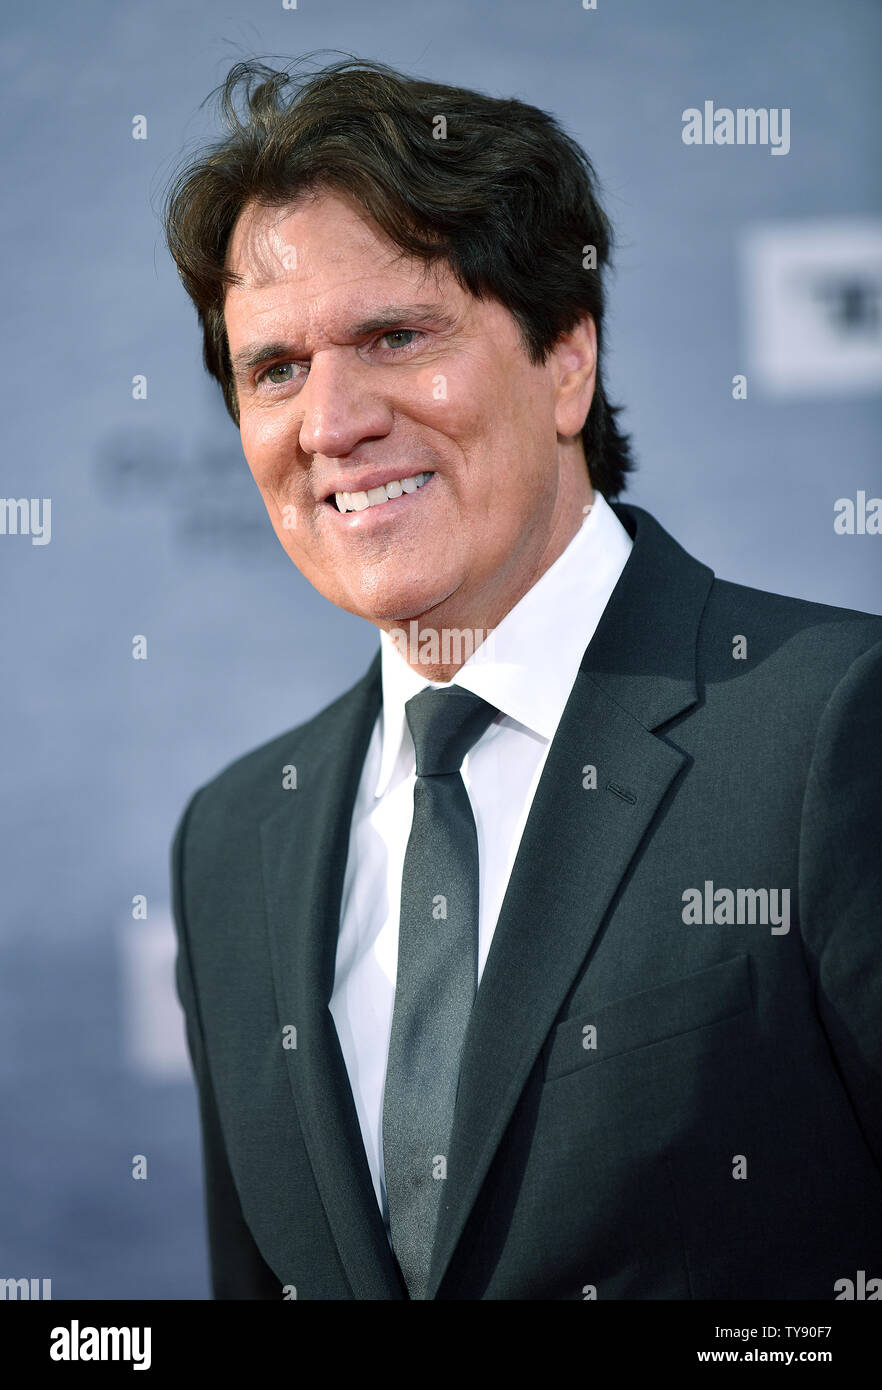 Rob Marshall arrives for the 10th annual TCM Classic Film Festival opening night screening of 'When Harry Met Sally' at  the TCL Chinese Theatre in Los Angeles, California on April 11, 2019. Photo by Chris Chew/UPI Stock Photo